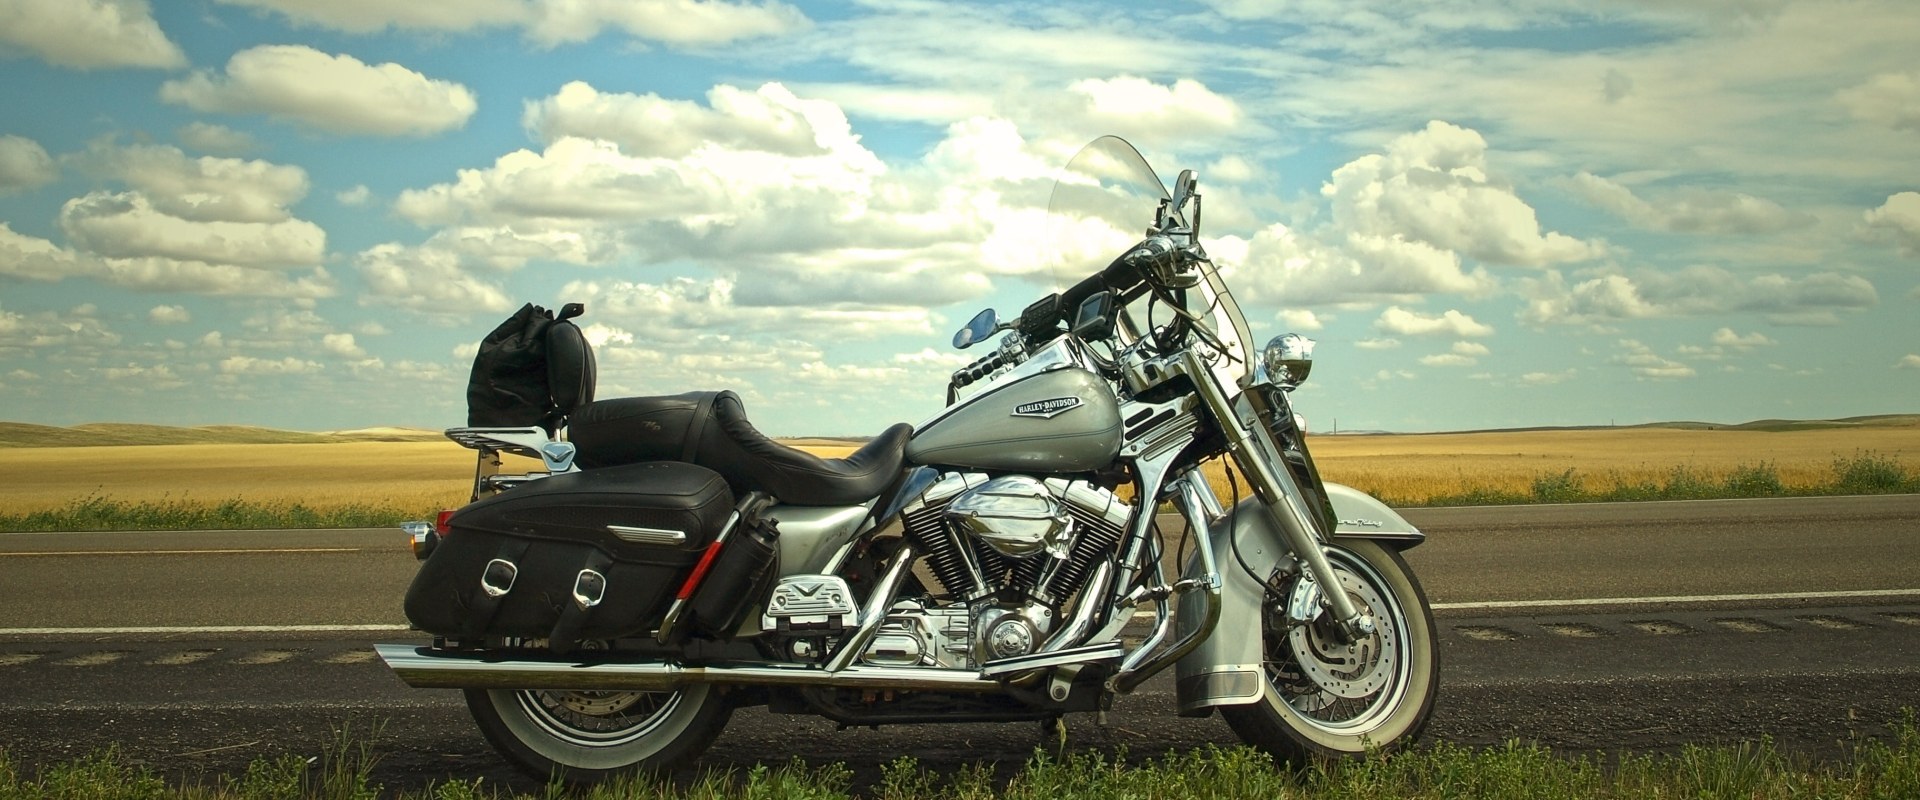 Motorcycle Insurance for College Students with a Co-signer